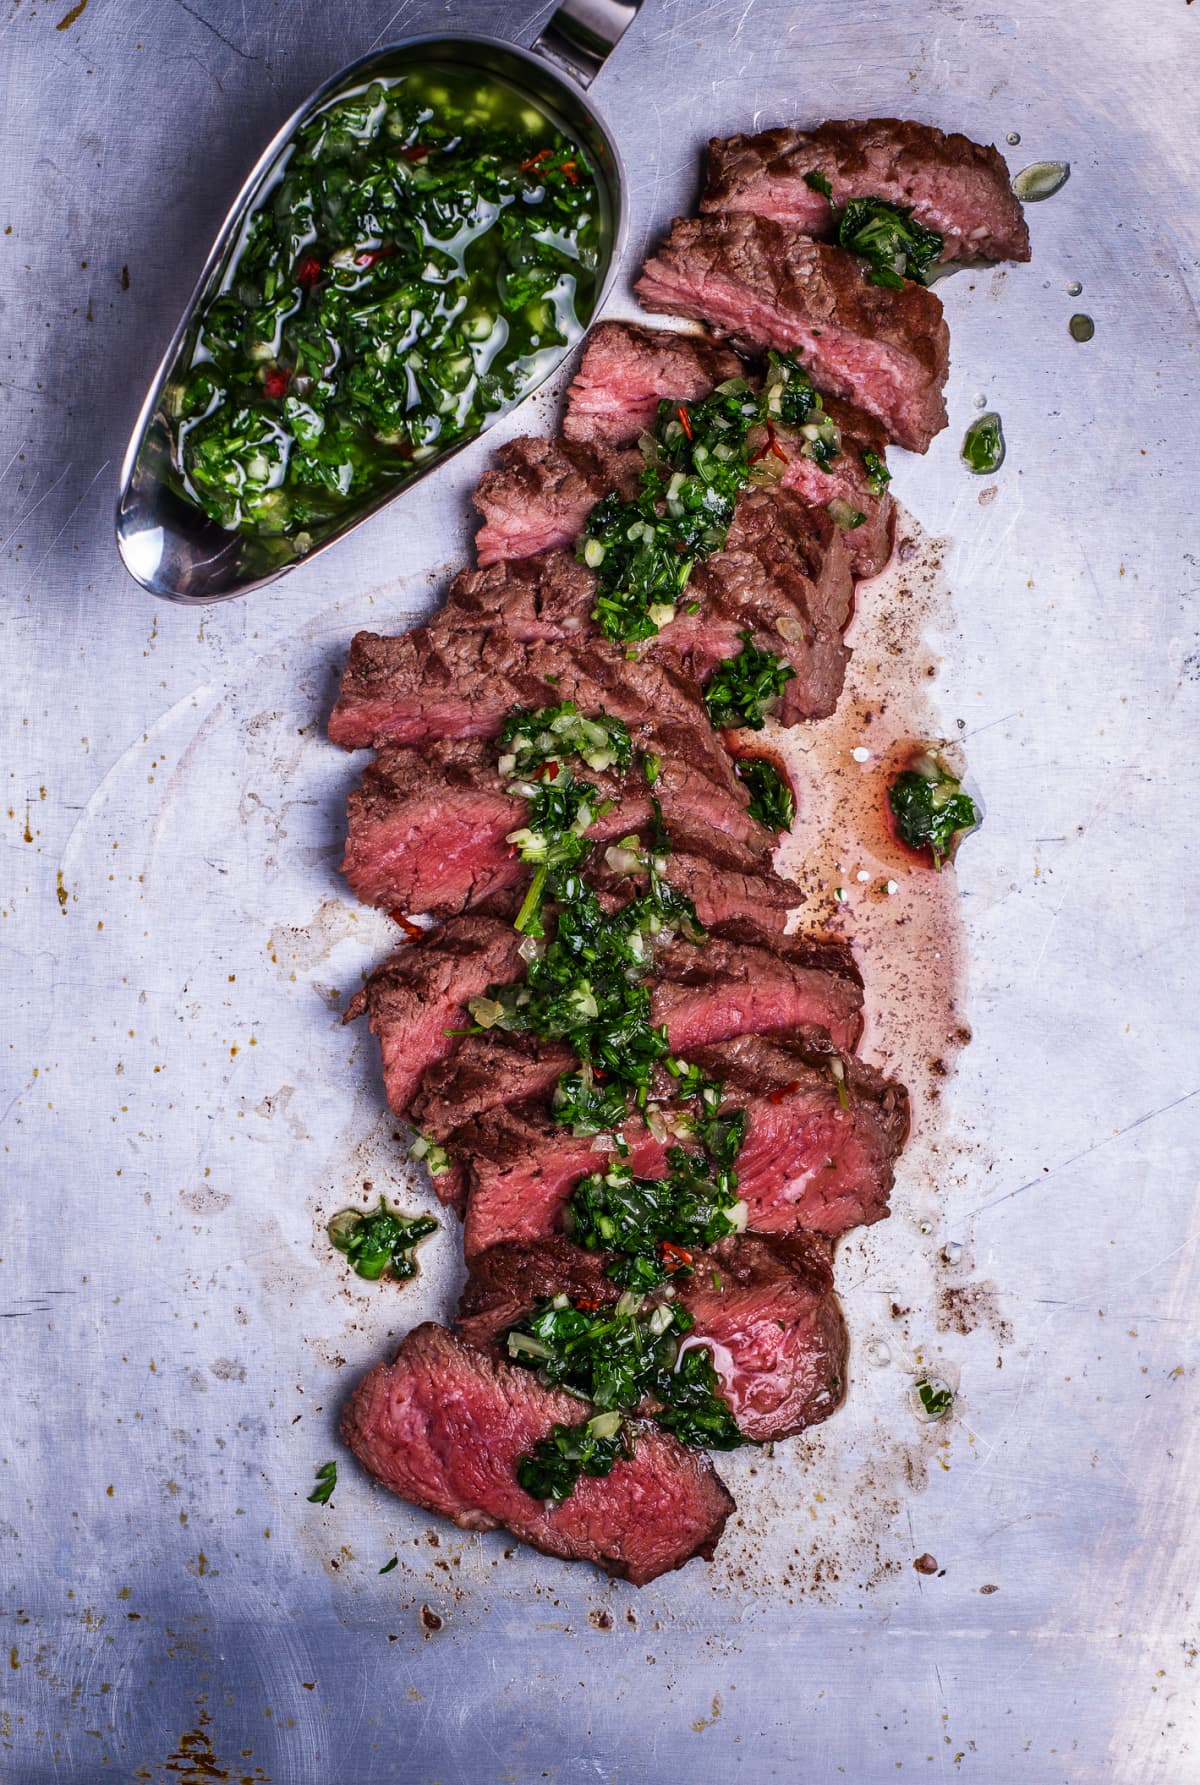 Graavy boat of chimichurri sauce next to skirt steak sliced and topped with chimichurri